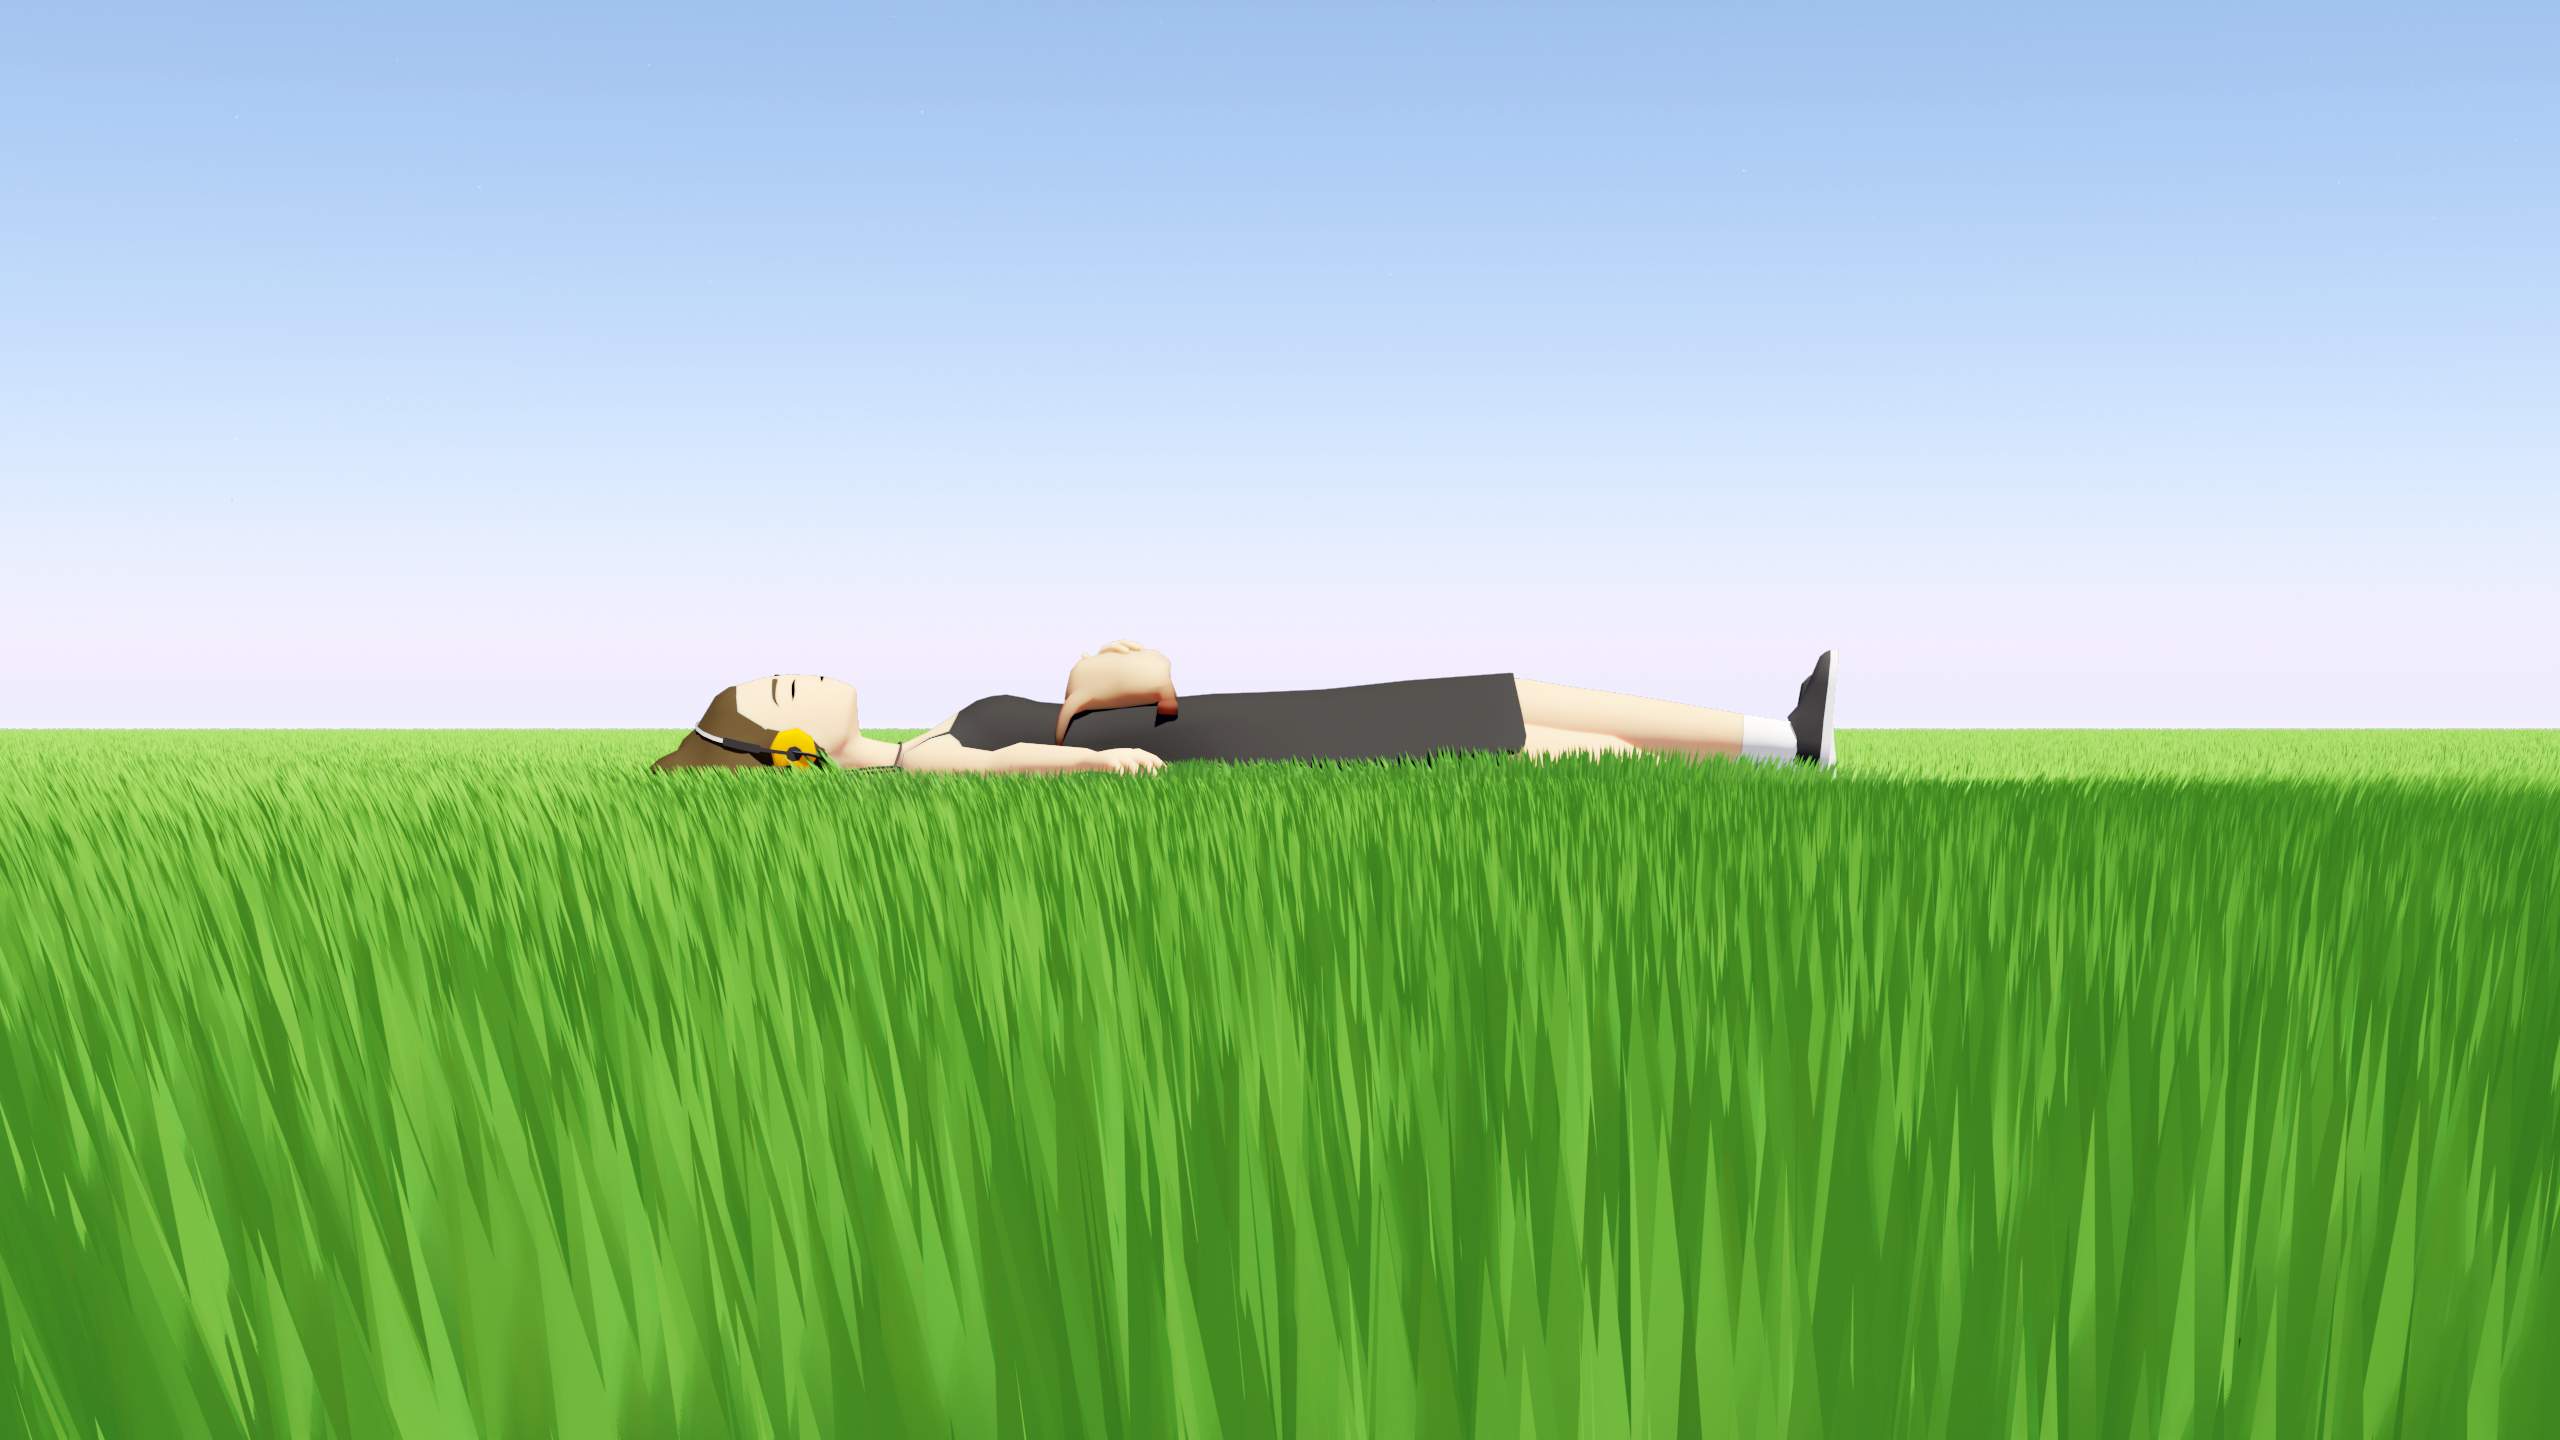 Clear grass. Guts in grass. Comic lying on a grass. Guts lying on grass.